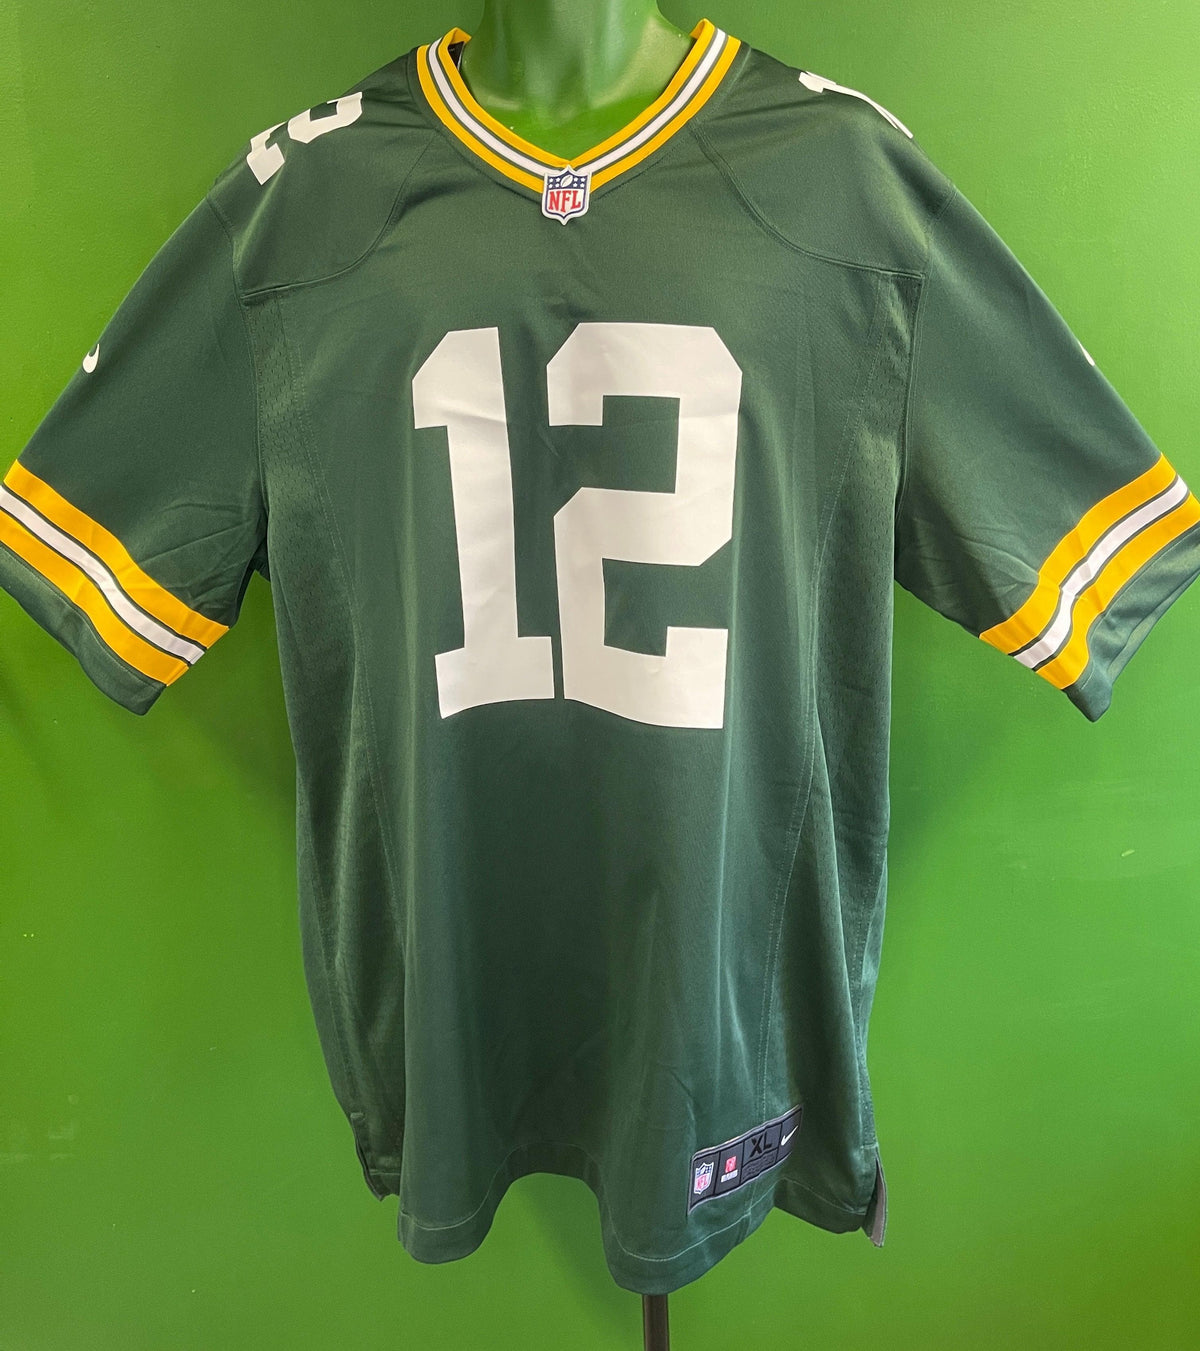 NFL Green Bay Packers Aaron Rodgers #12 Game Jersey Men's X-Large NWT